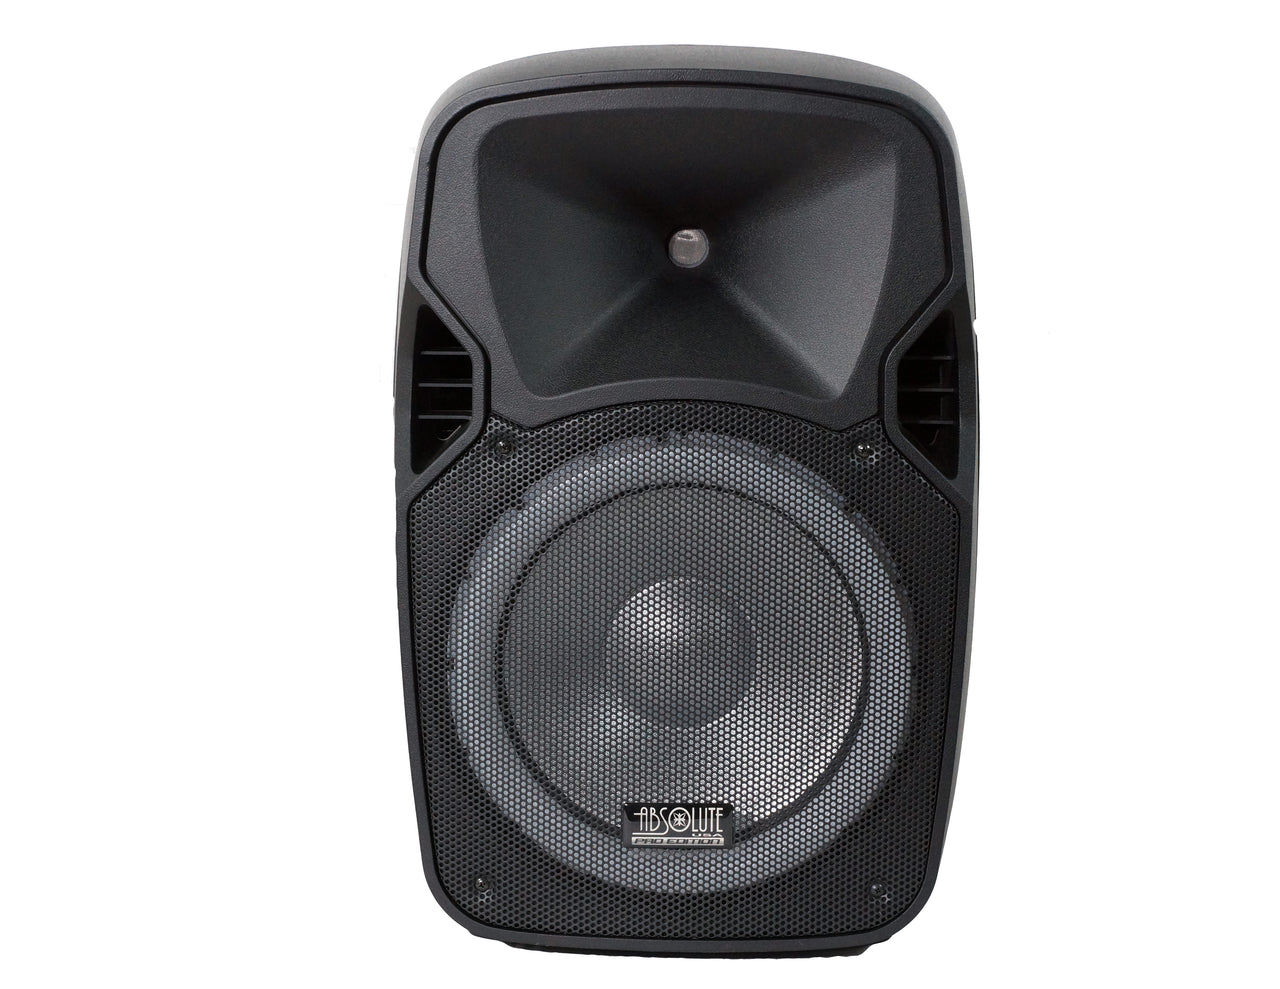 Absolute USA USPROBAT12 12" Wireless Portable PA Speaker System 3000W High Powered Bluetooth Indoor and Outdoor DJ PA Sound Stereo Loudspeaker USB SD MP3 AUX Input Flashing Party Light & FM Radio